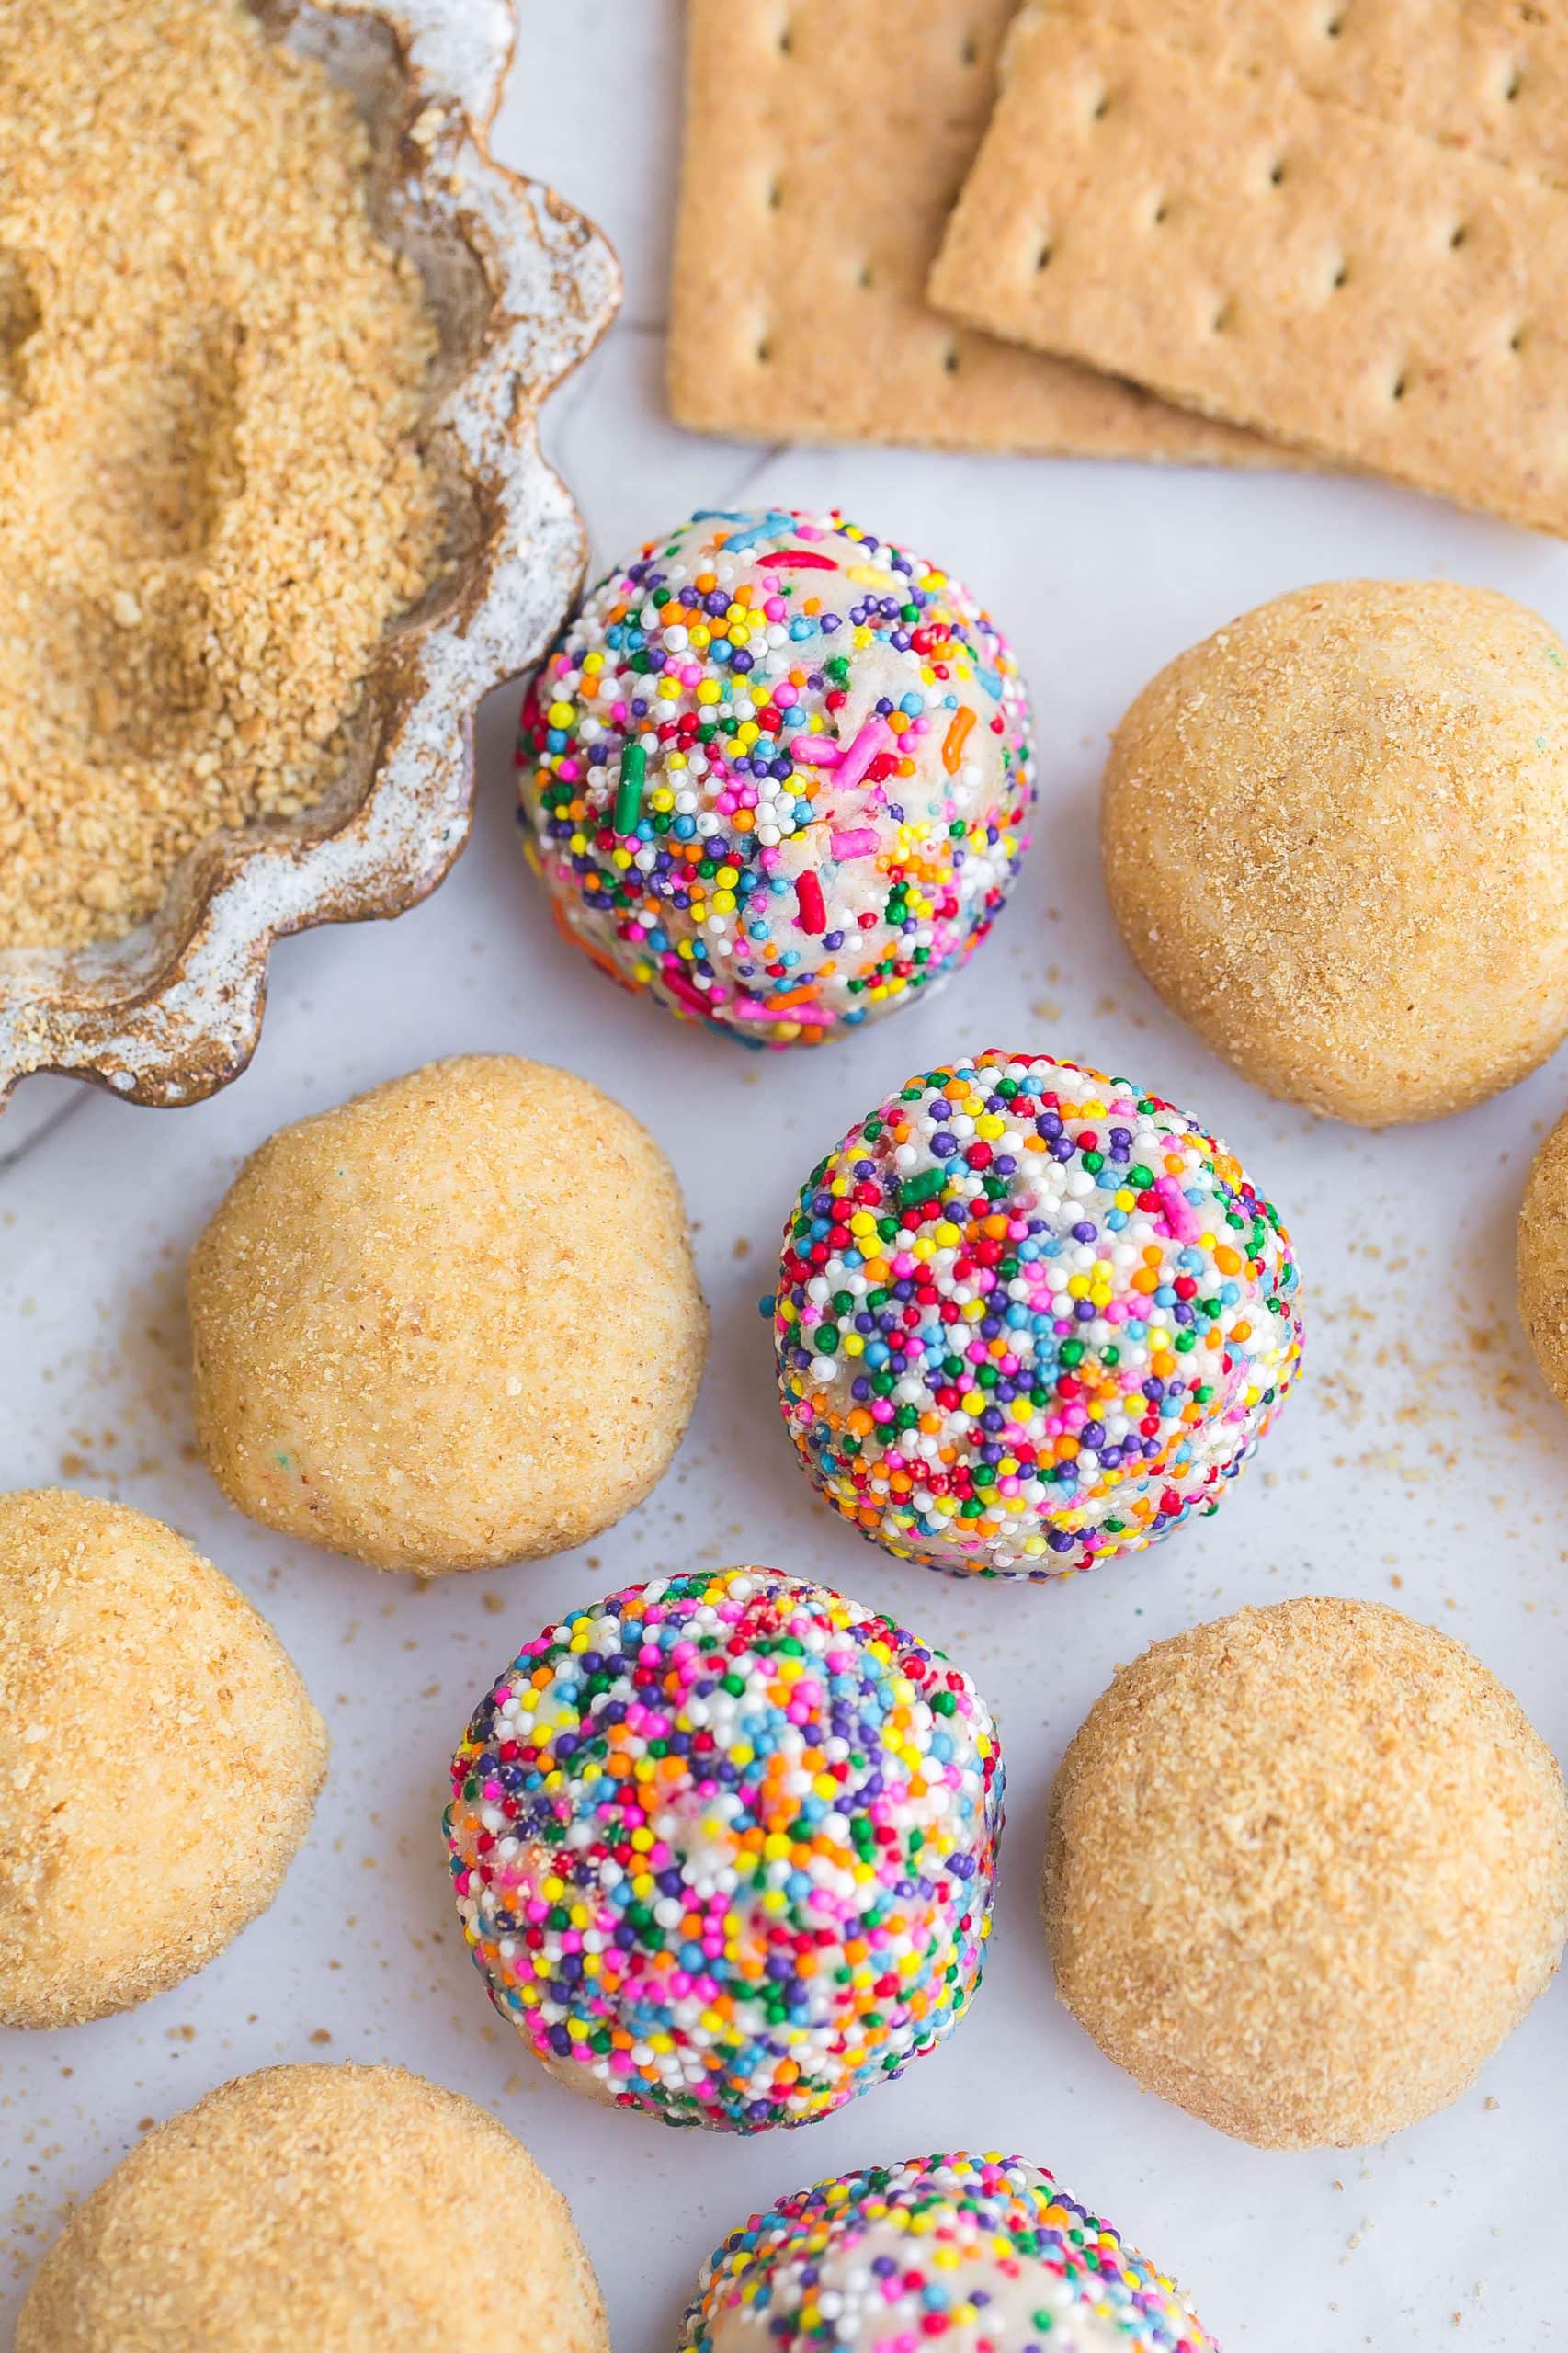 Cheesecake balls coated in sprinkles and graham crackers.